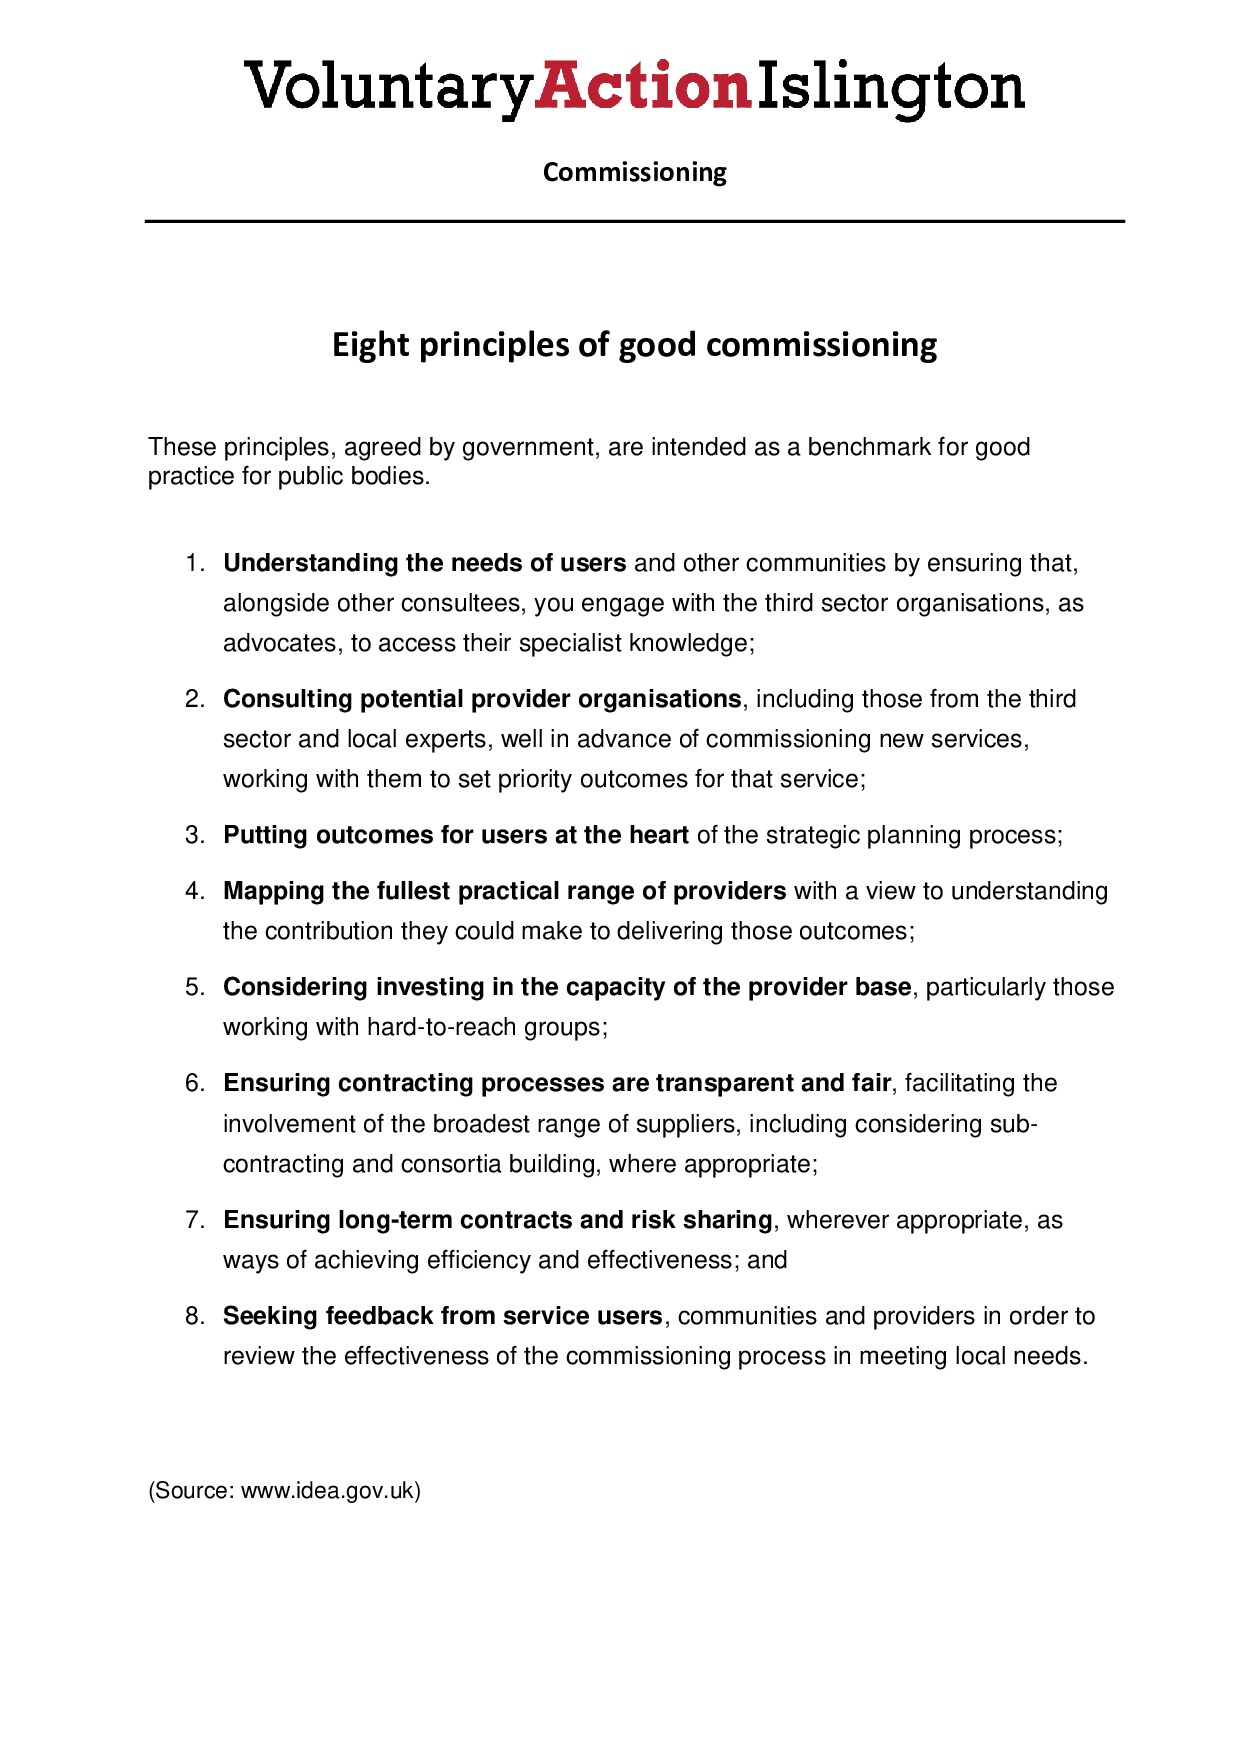 110411 Eight principles of good commissioning